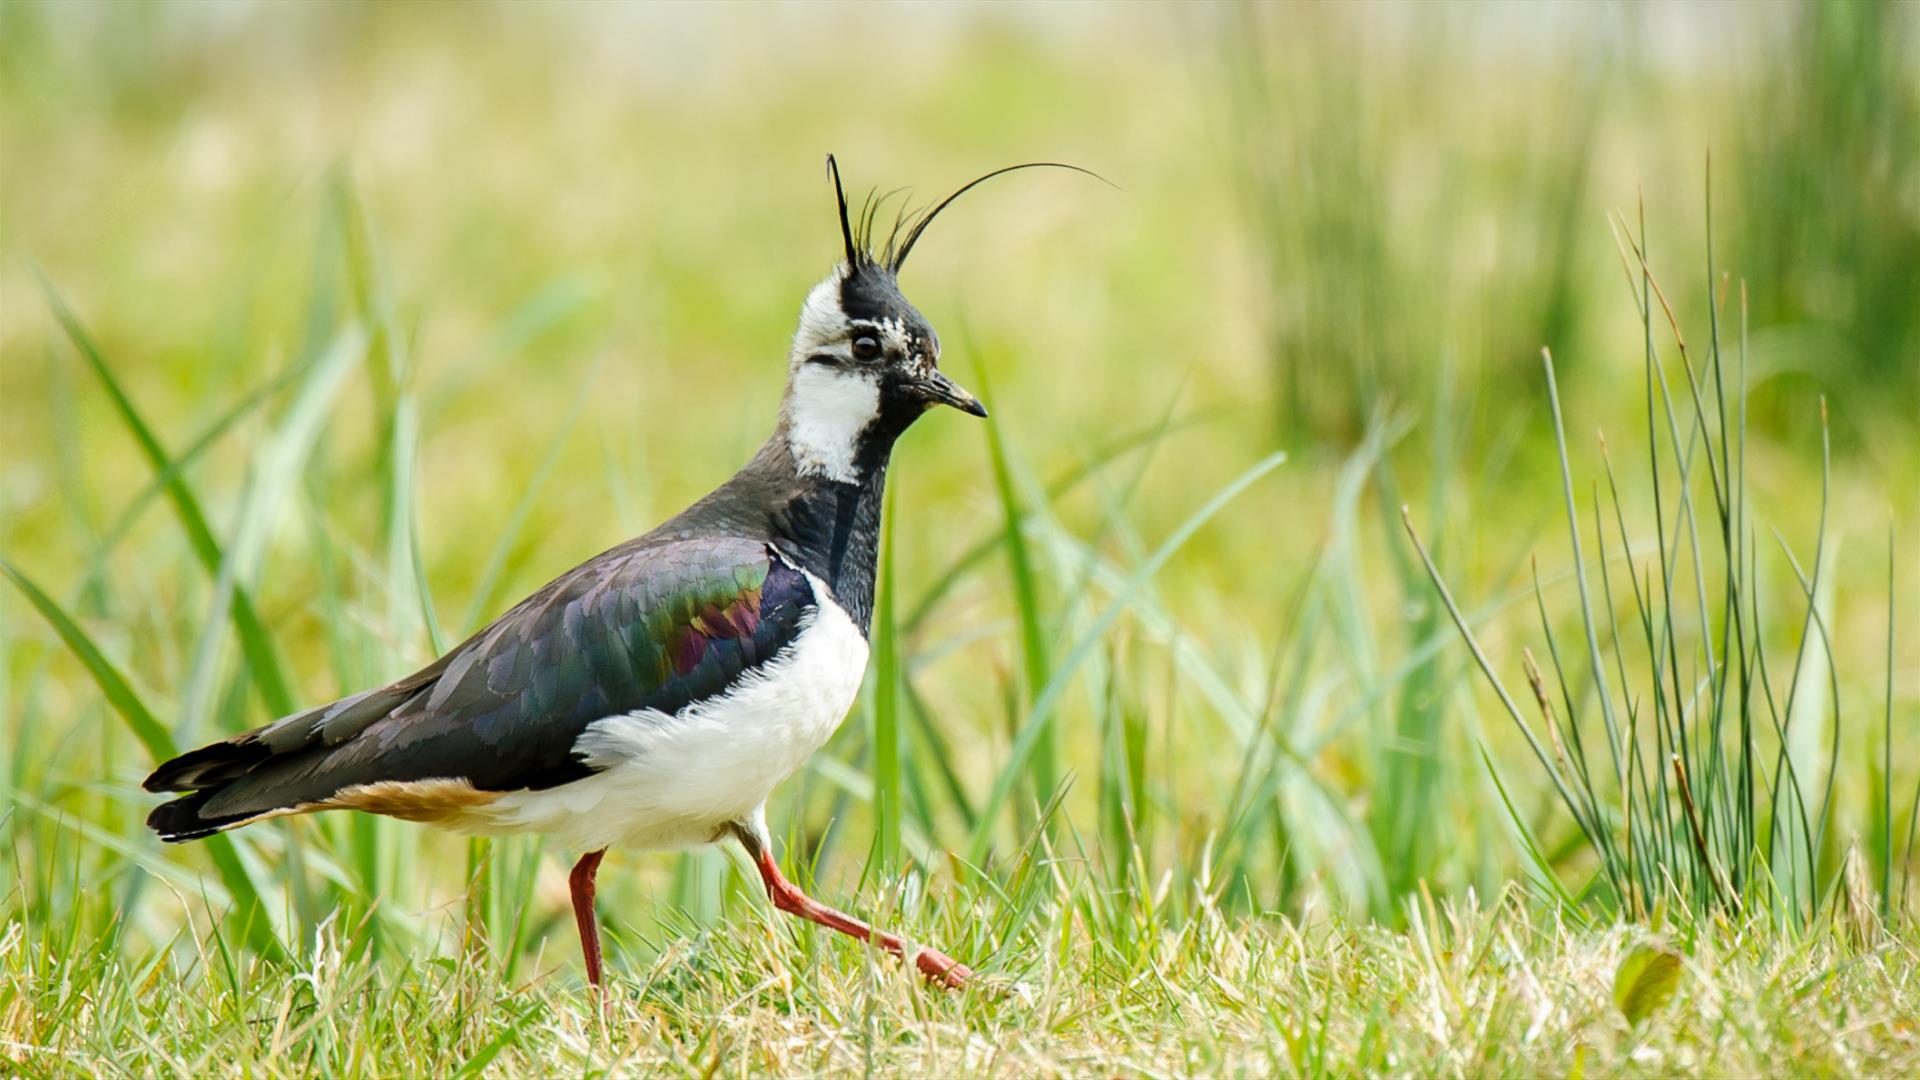 Lapwing walking over grass.